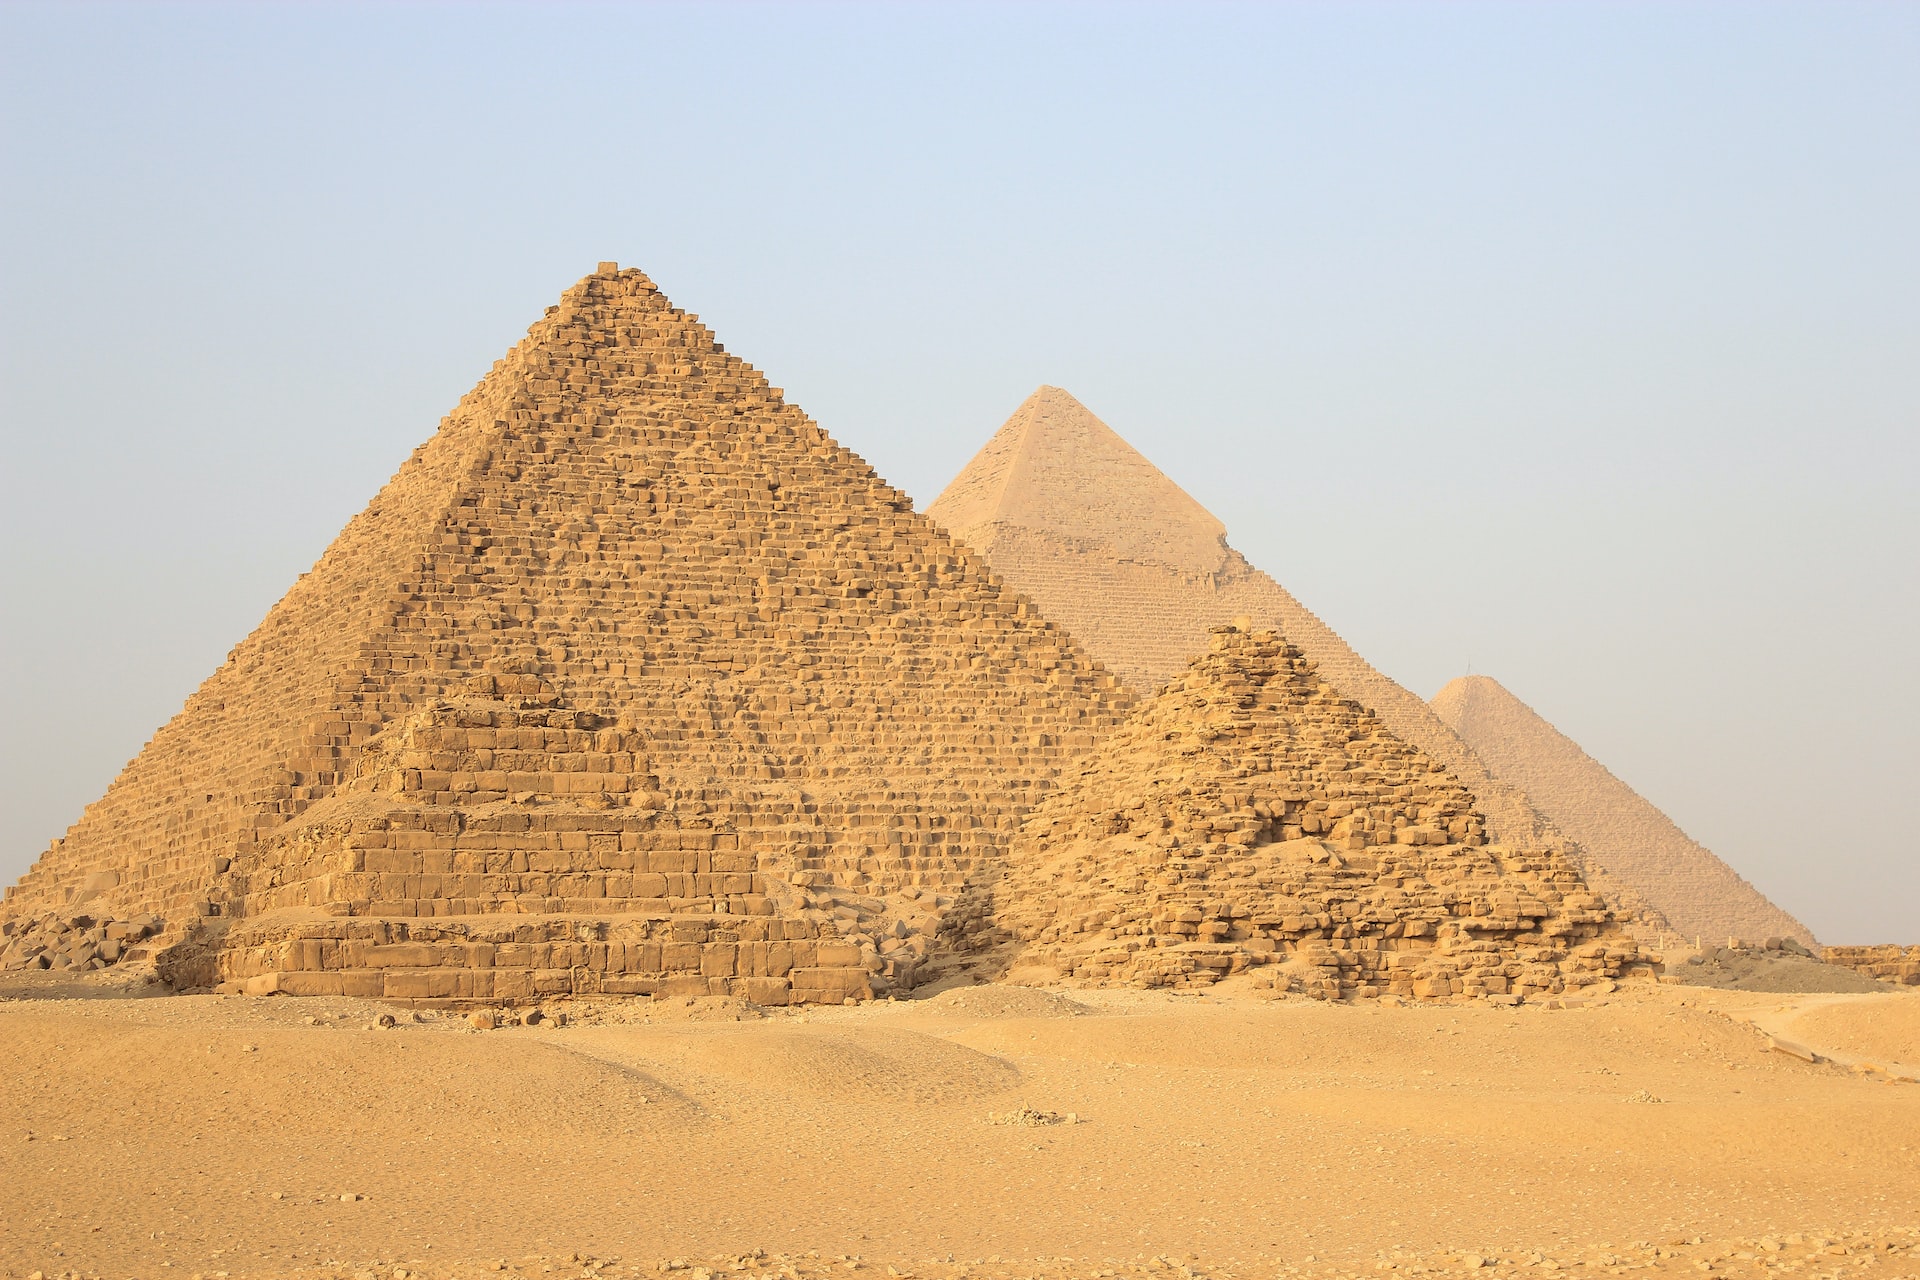 How many Pyramids are there in the World?